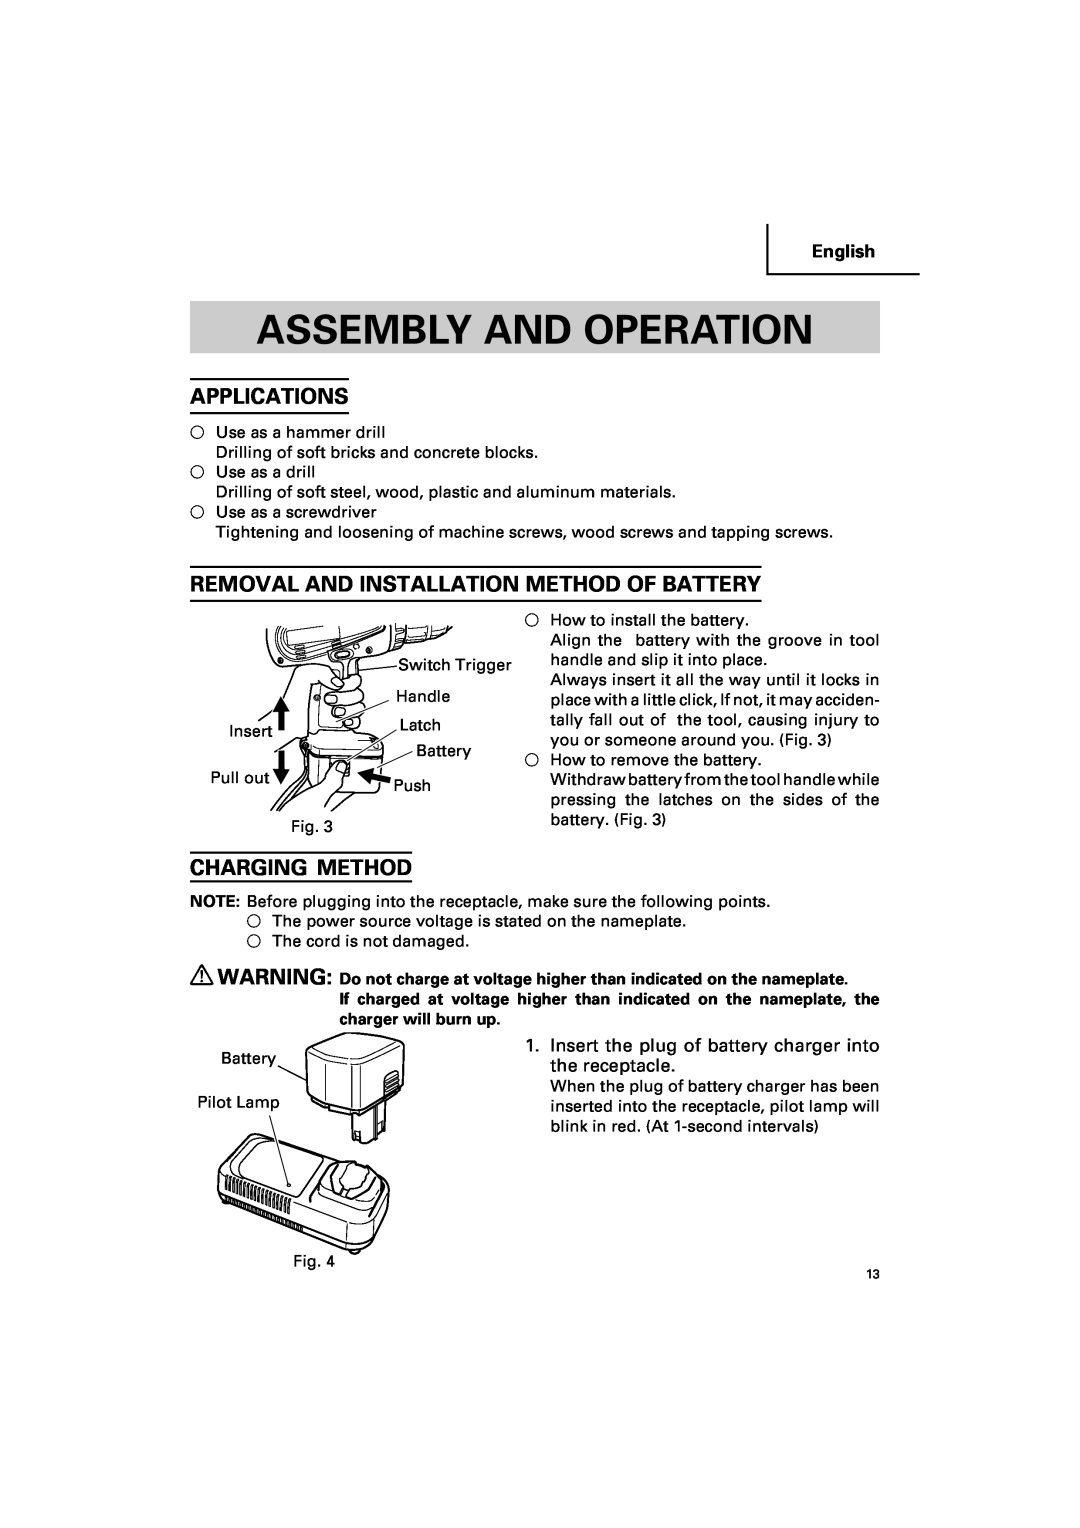 Hitachi DV 14DV Assembly And Operation, Applications, Removal And Installation Method Of Battery, Charging Method, English 